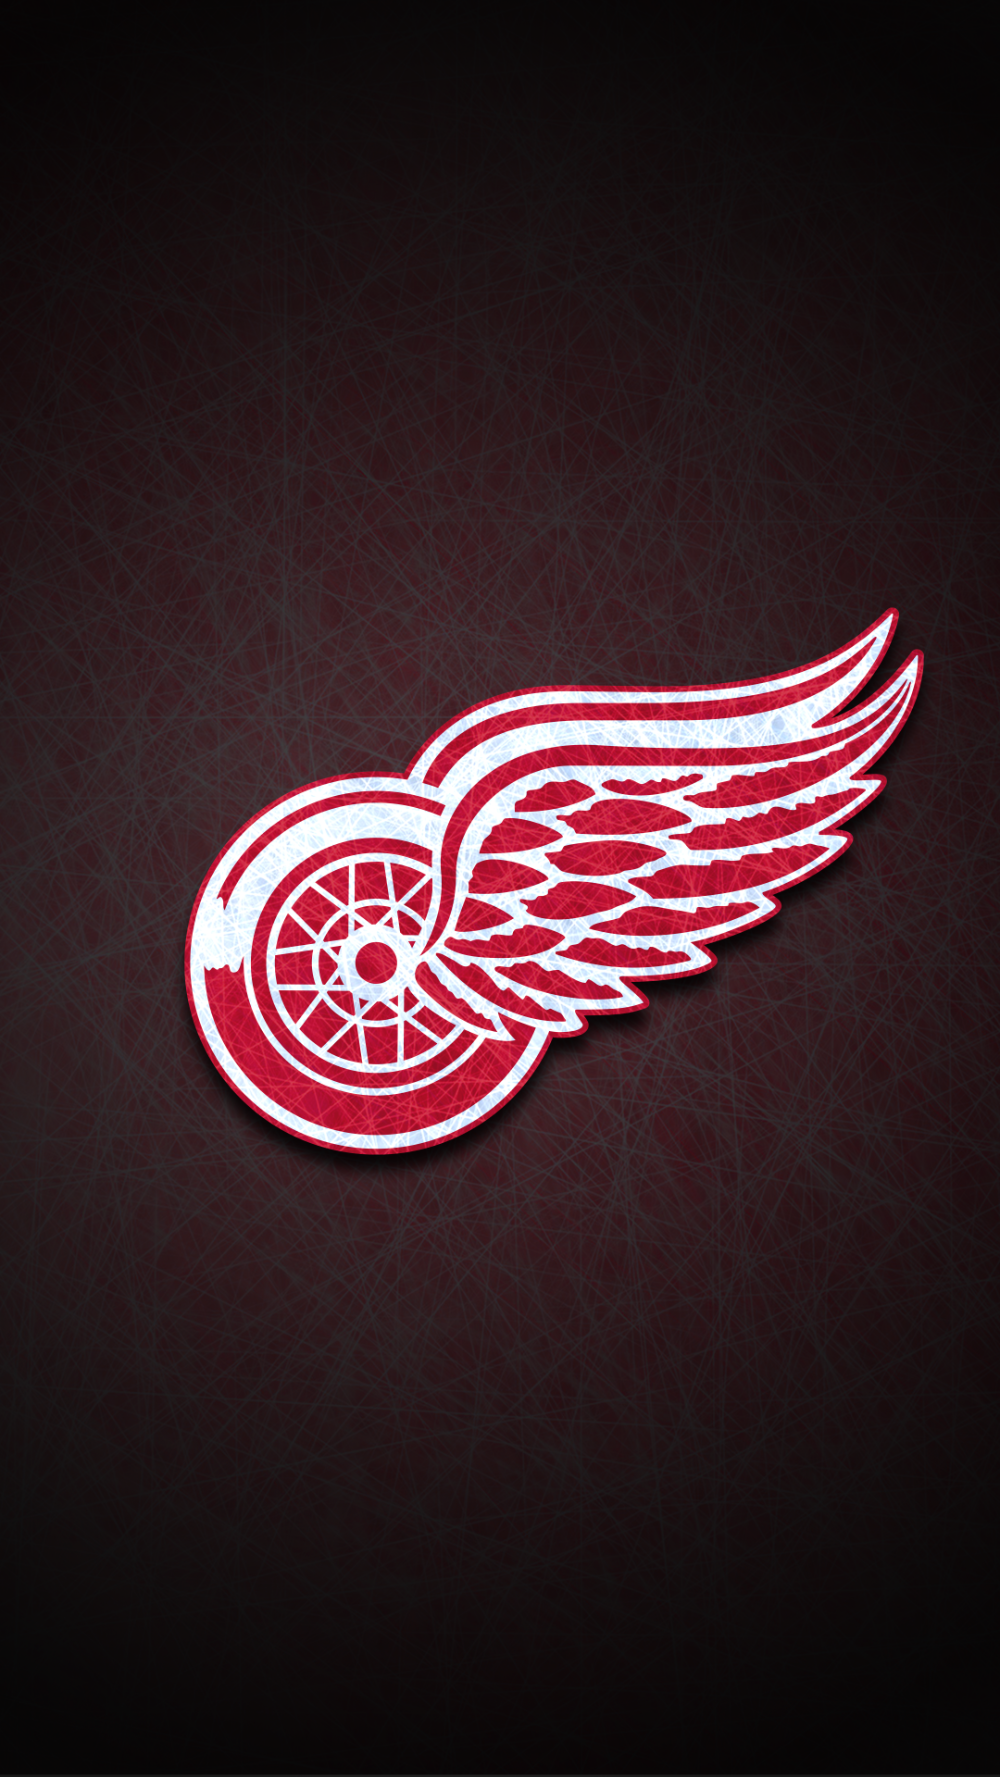 Detroit Red Wings Wallpapers - Wallpaper Cave